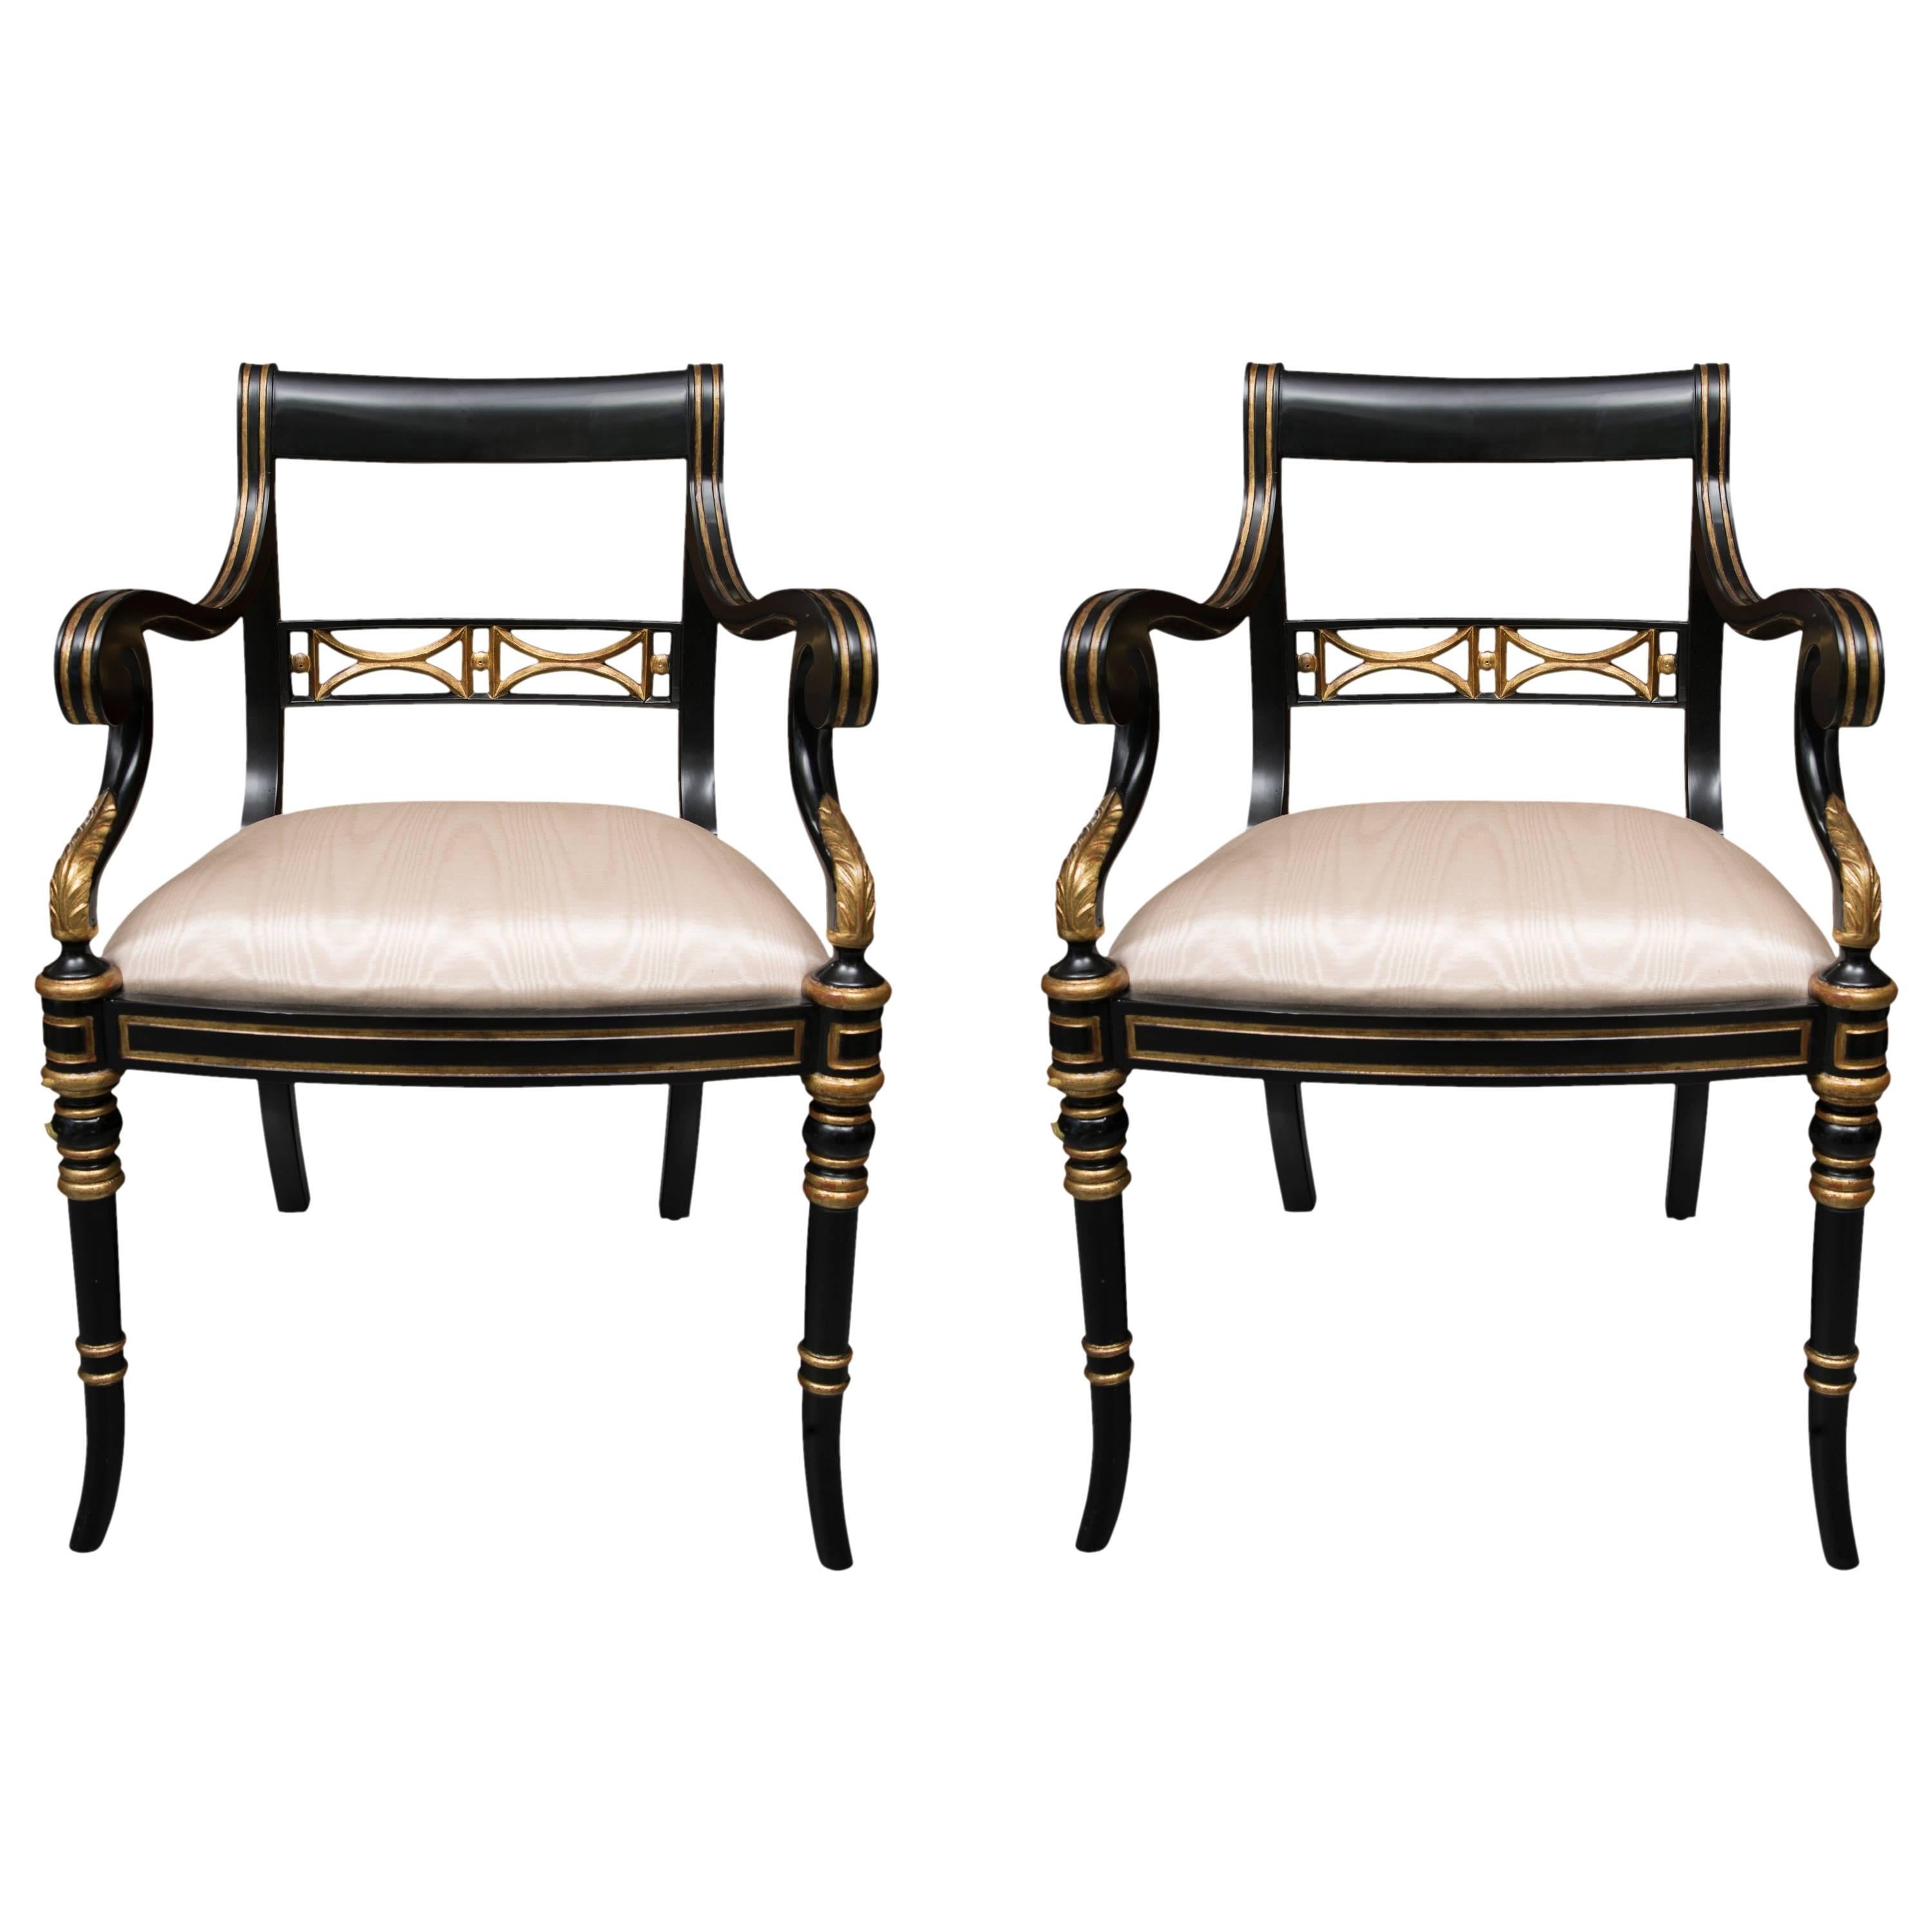 Pair of Regency Style Ebonized and Parcel Gilt Armchairs